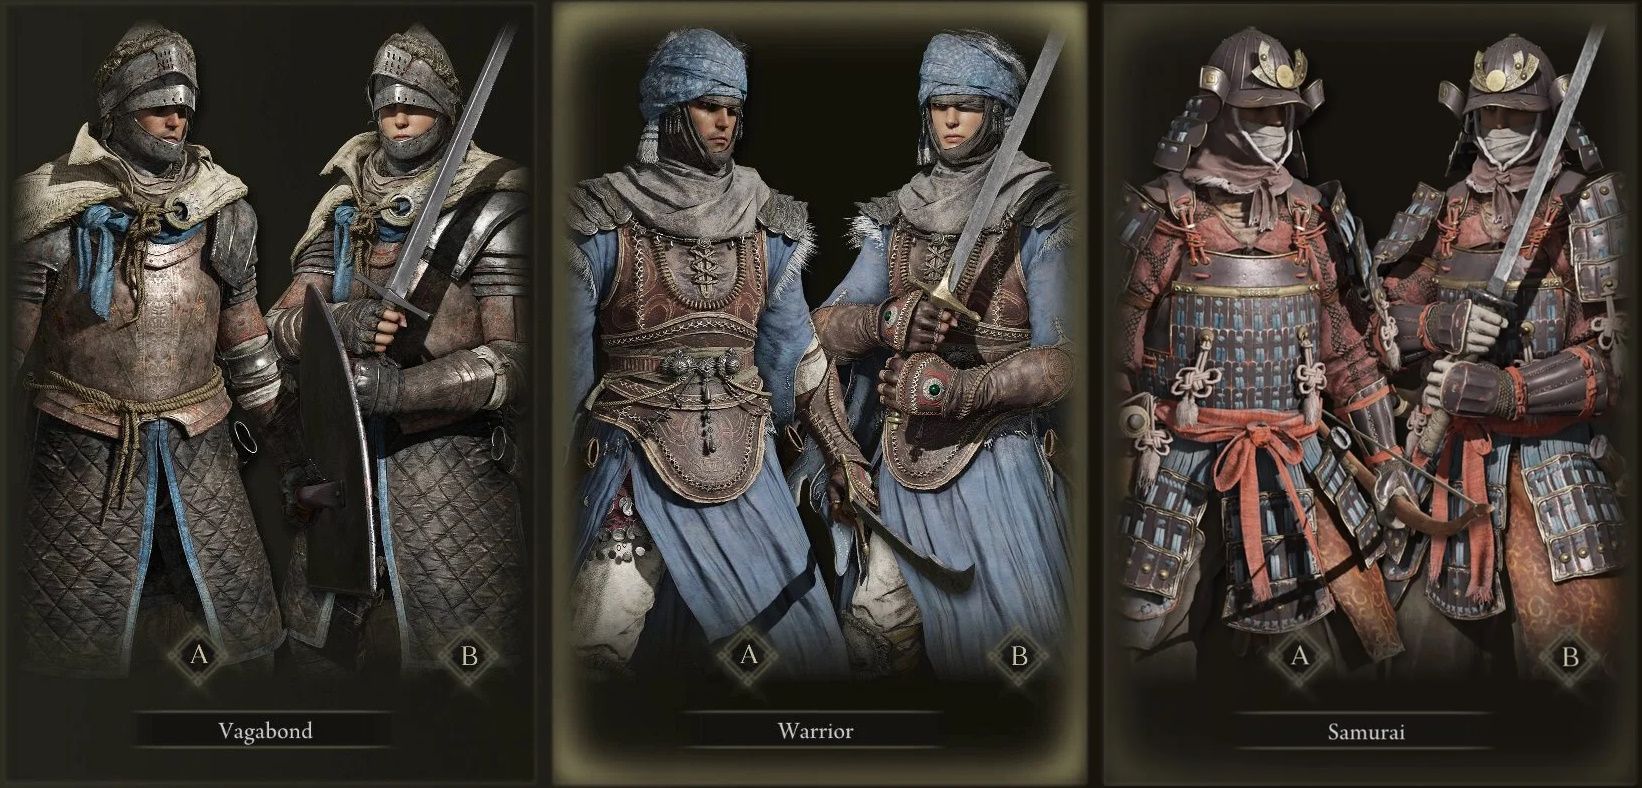 The character select screen offering Vagabond, Warrior, and Samurai options in Elden Ring.